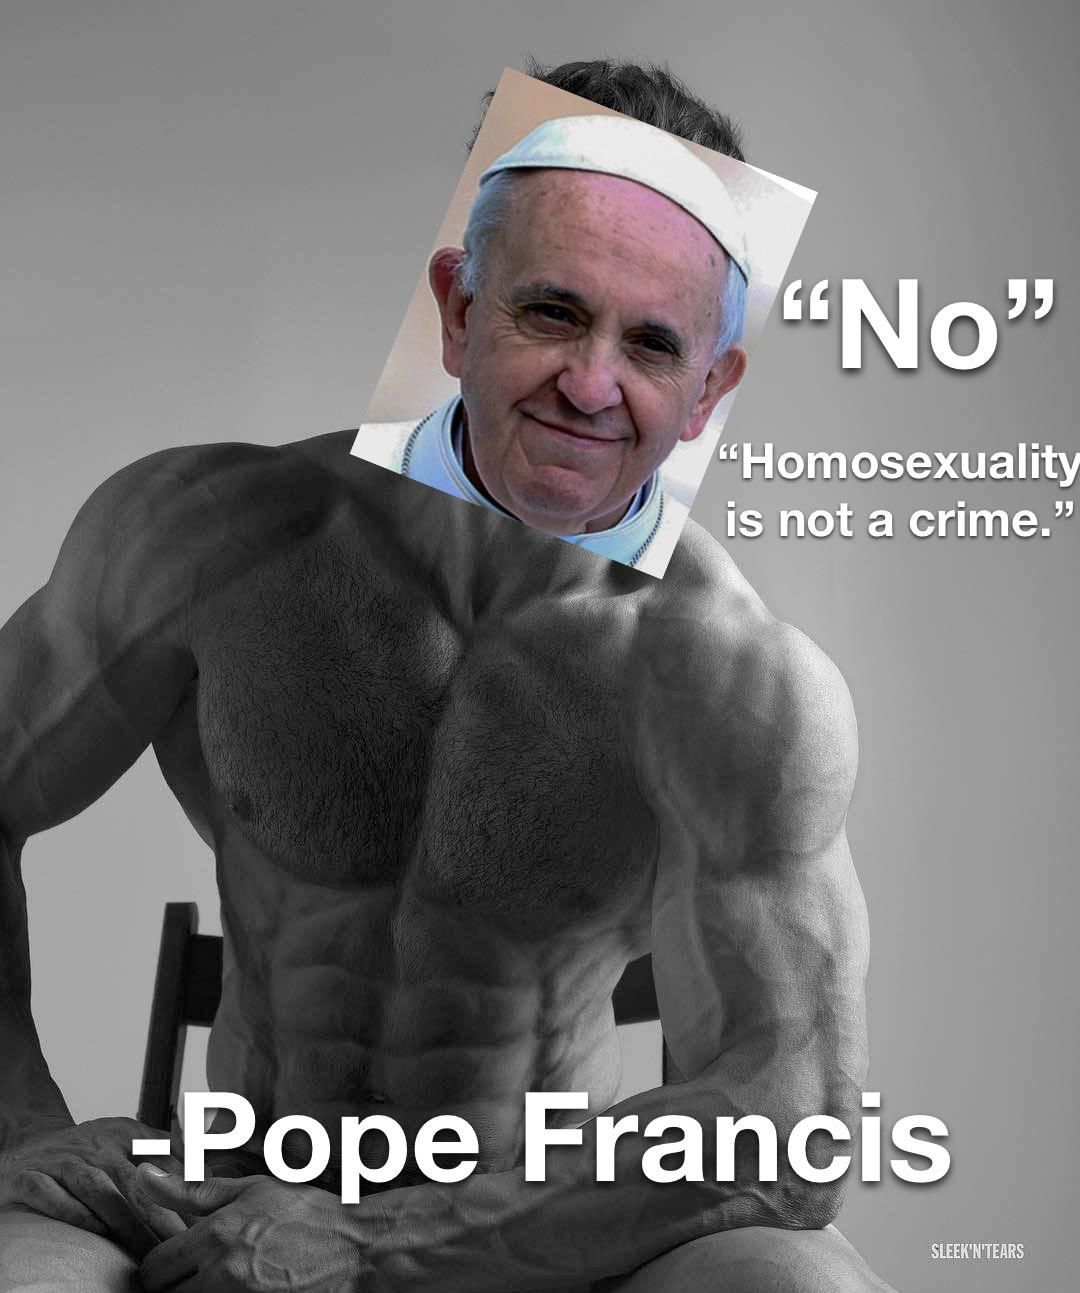 Pope Francis is a chad